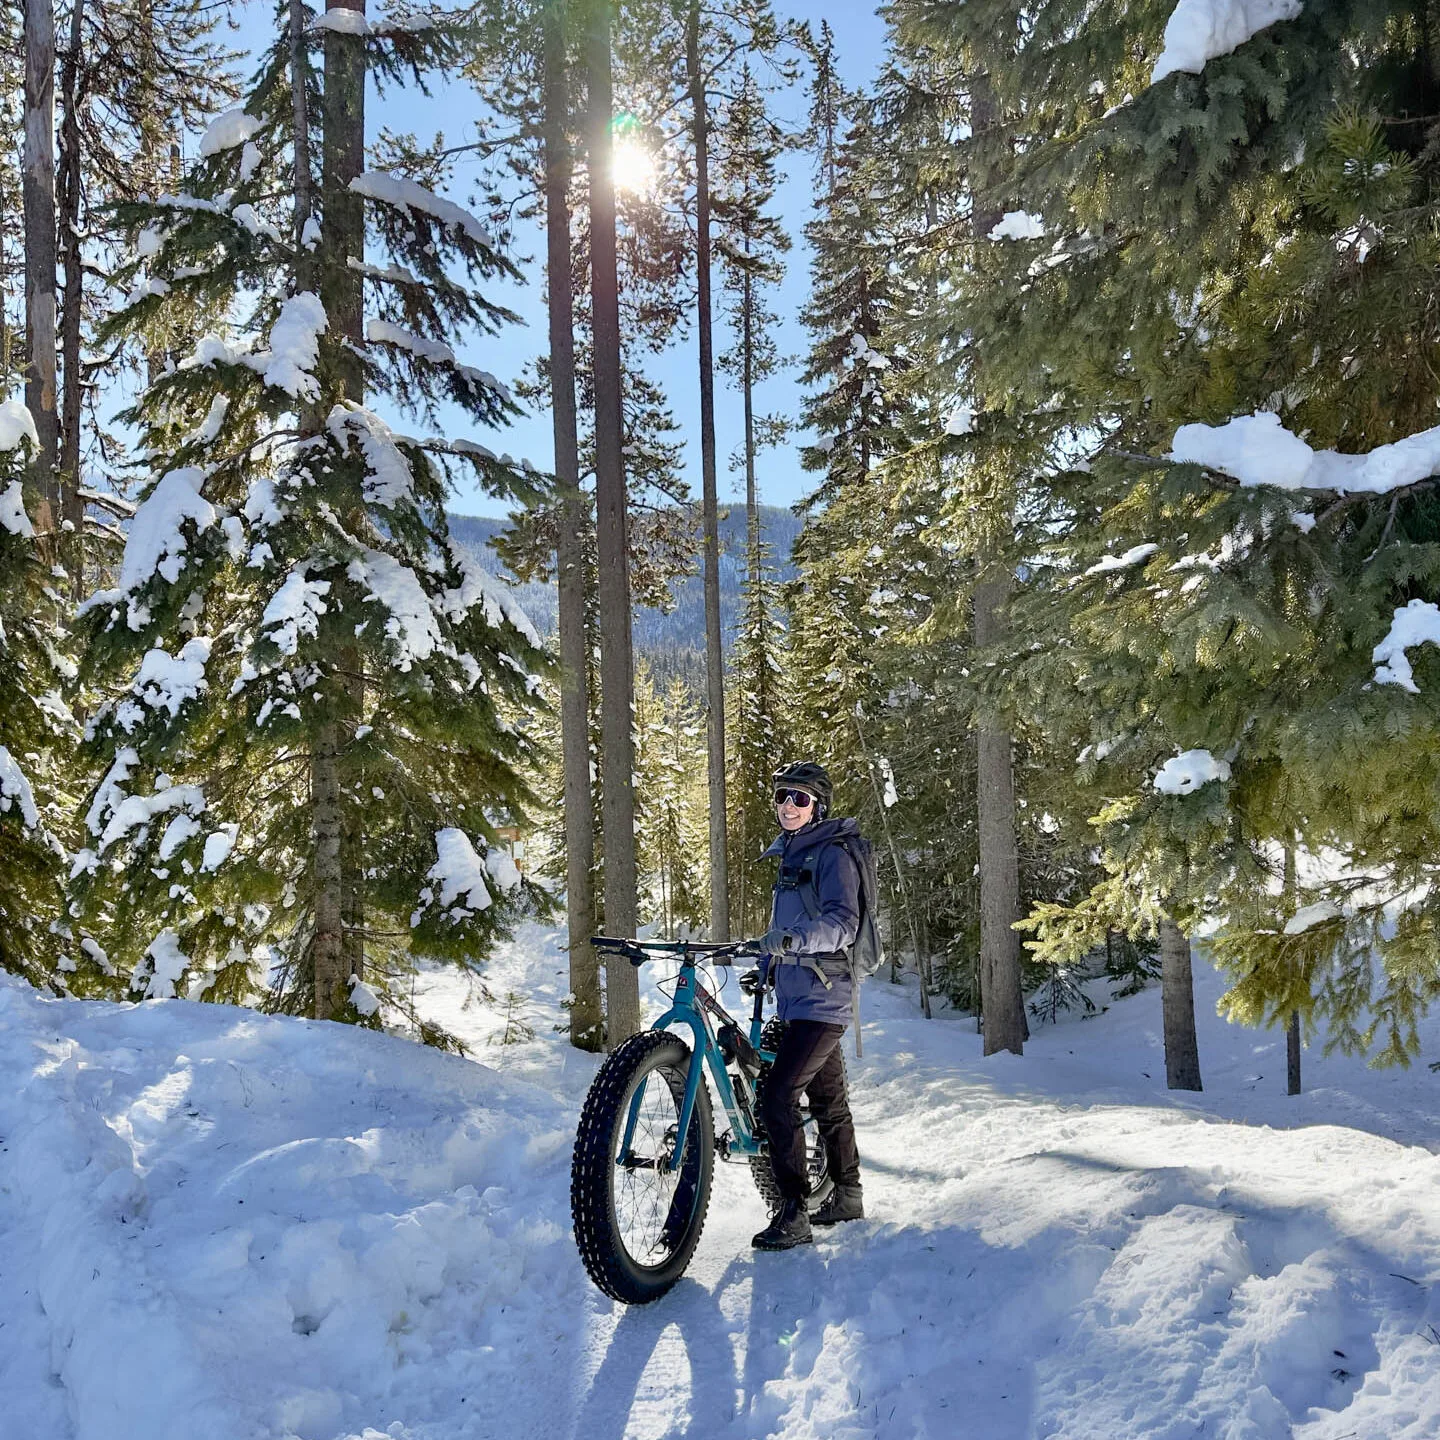 A woman stands smiling next to a fat tire bike on the snow. Snowy pines are behind her.